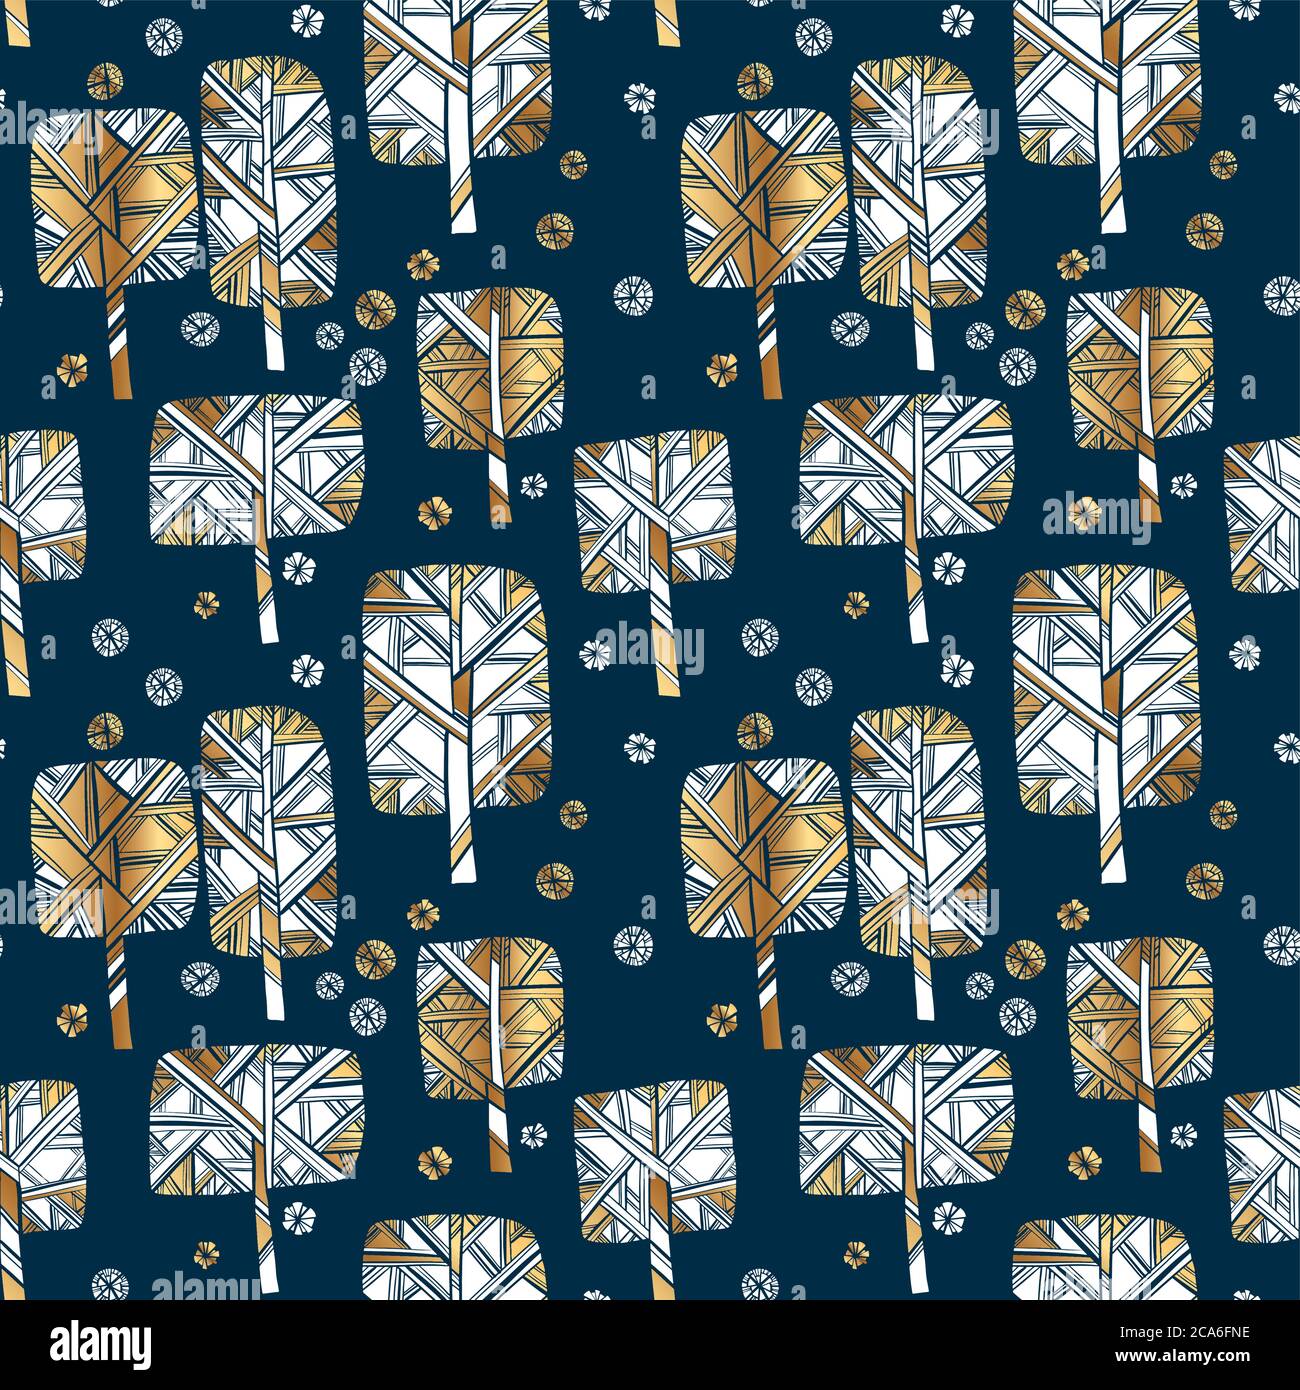 Silhouette winter tree luxury seamless pattern for background, fabric, textile, wrap, surface, web and print design. Snowflakes and park rapport. Stock Vector